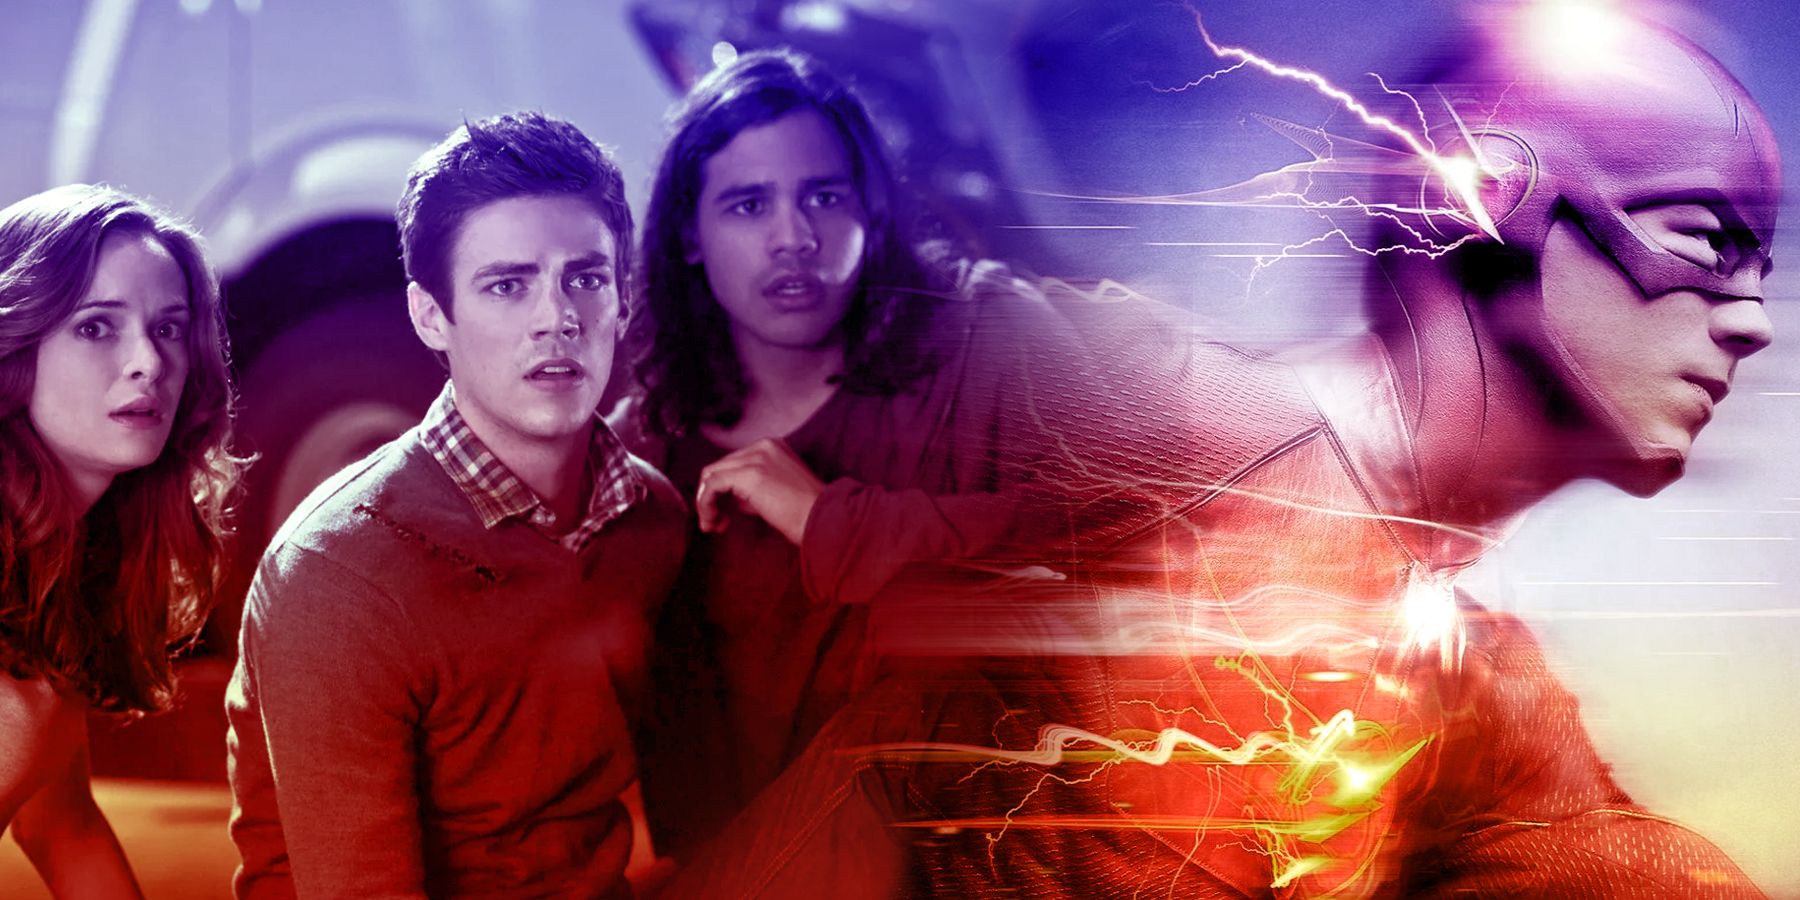 On the left, Caitlin Snow, Cisco Ramon and Barry Allen sit in the road looking shocked. On the right, The Flash is sprinting with webs of energy surrounding him.